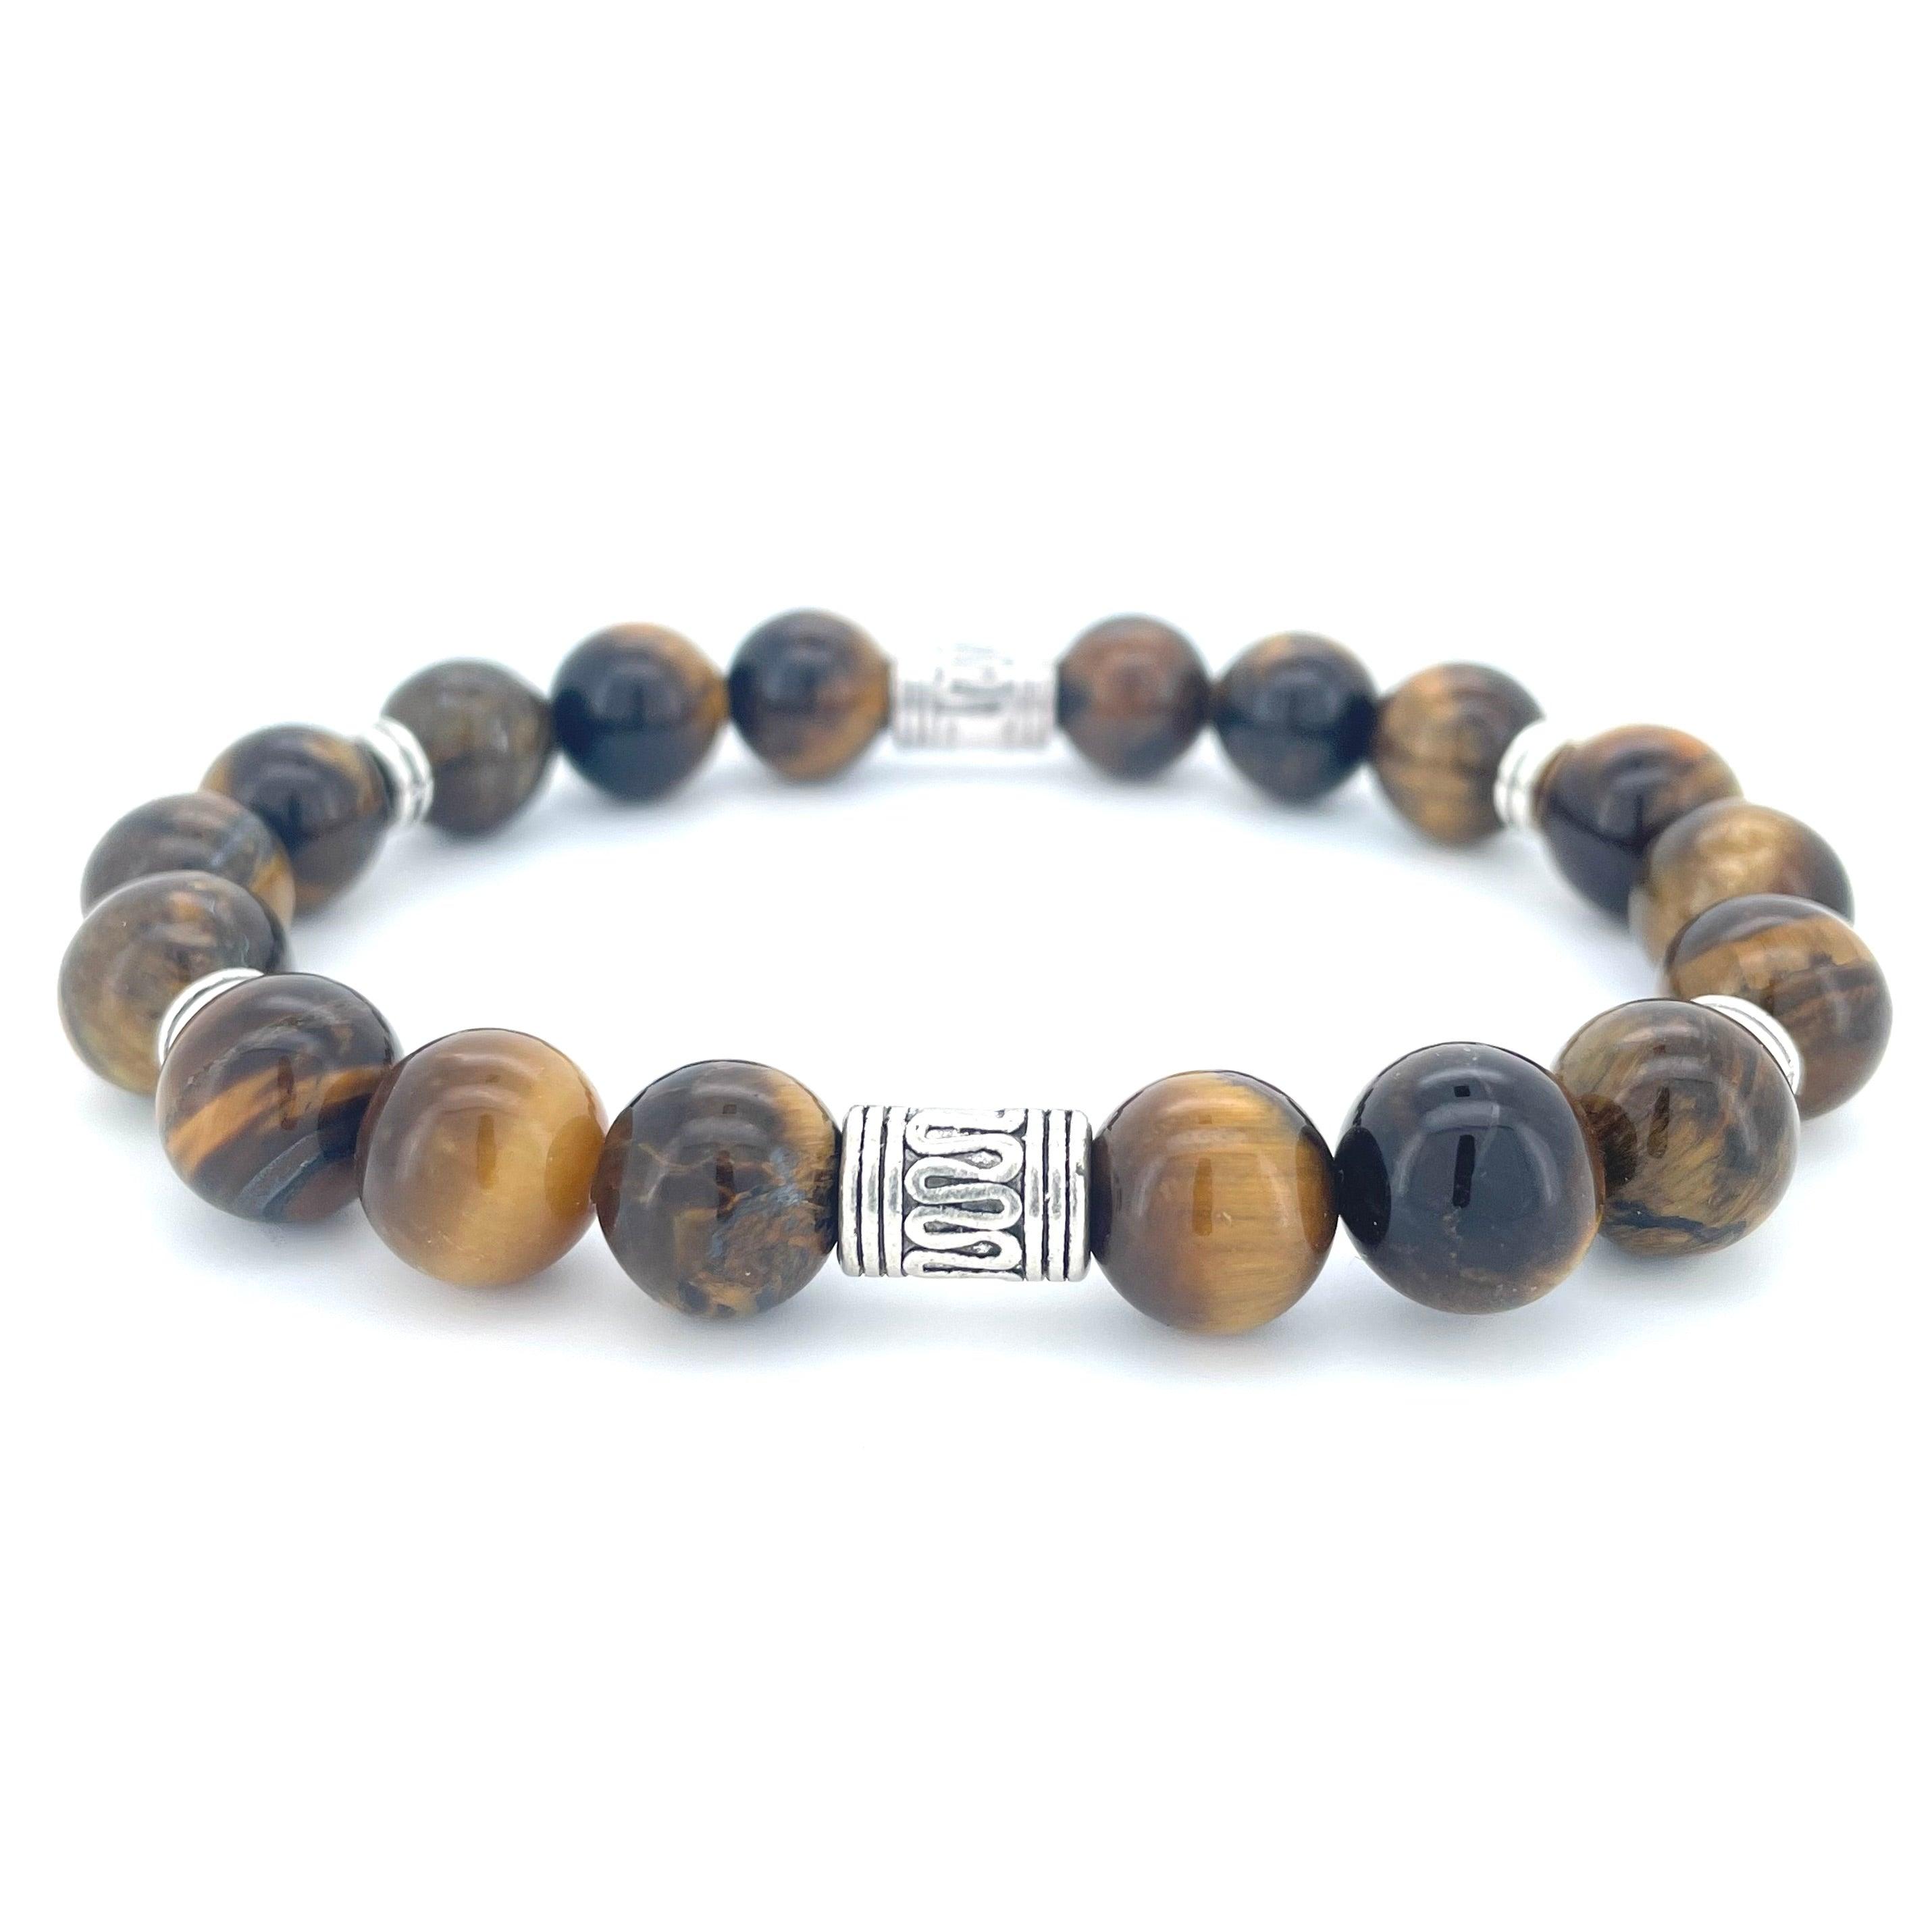 TIGERS EYE BEADED BRACELET - LUCID COLLECTION - Headless Nation